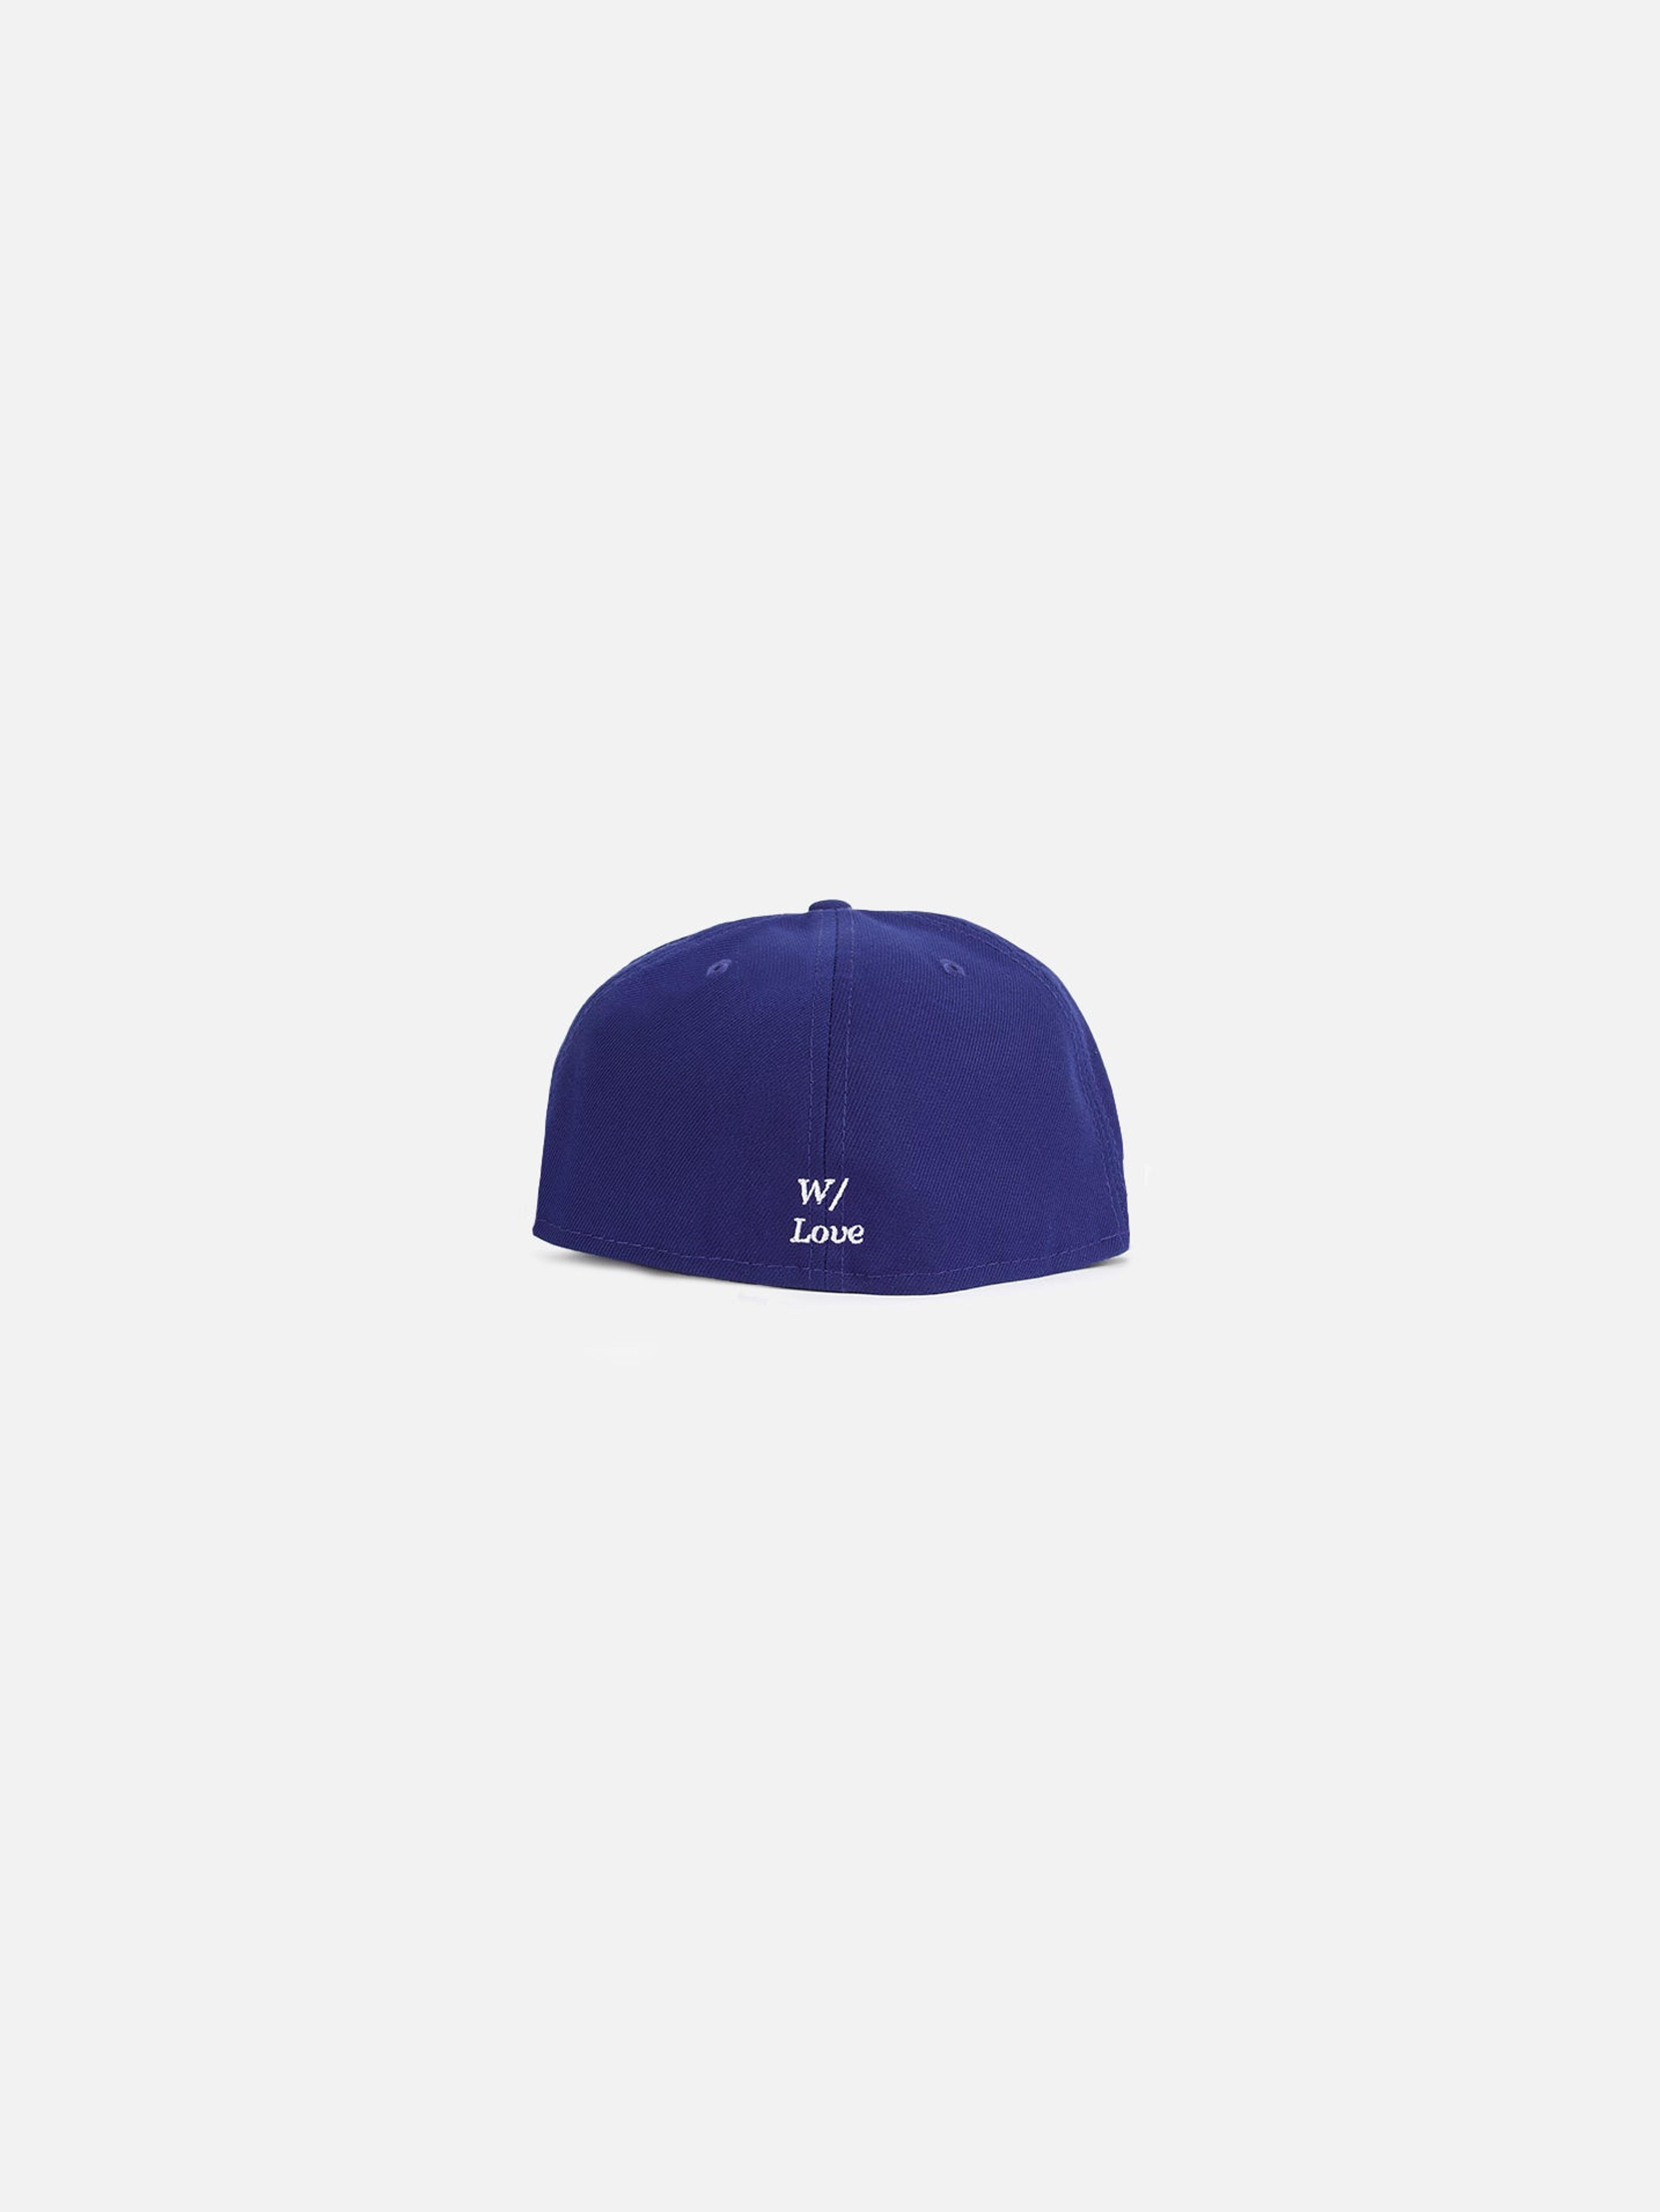 Alternate View 1 of Bricks & Wood x Dodgers New Era Fitted - Royal